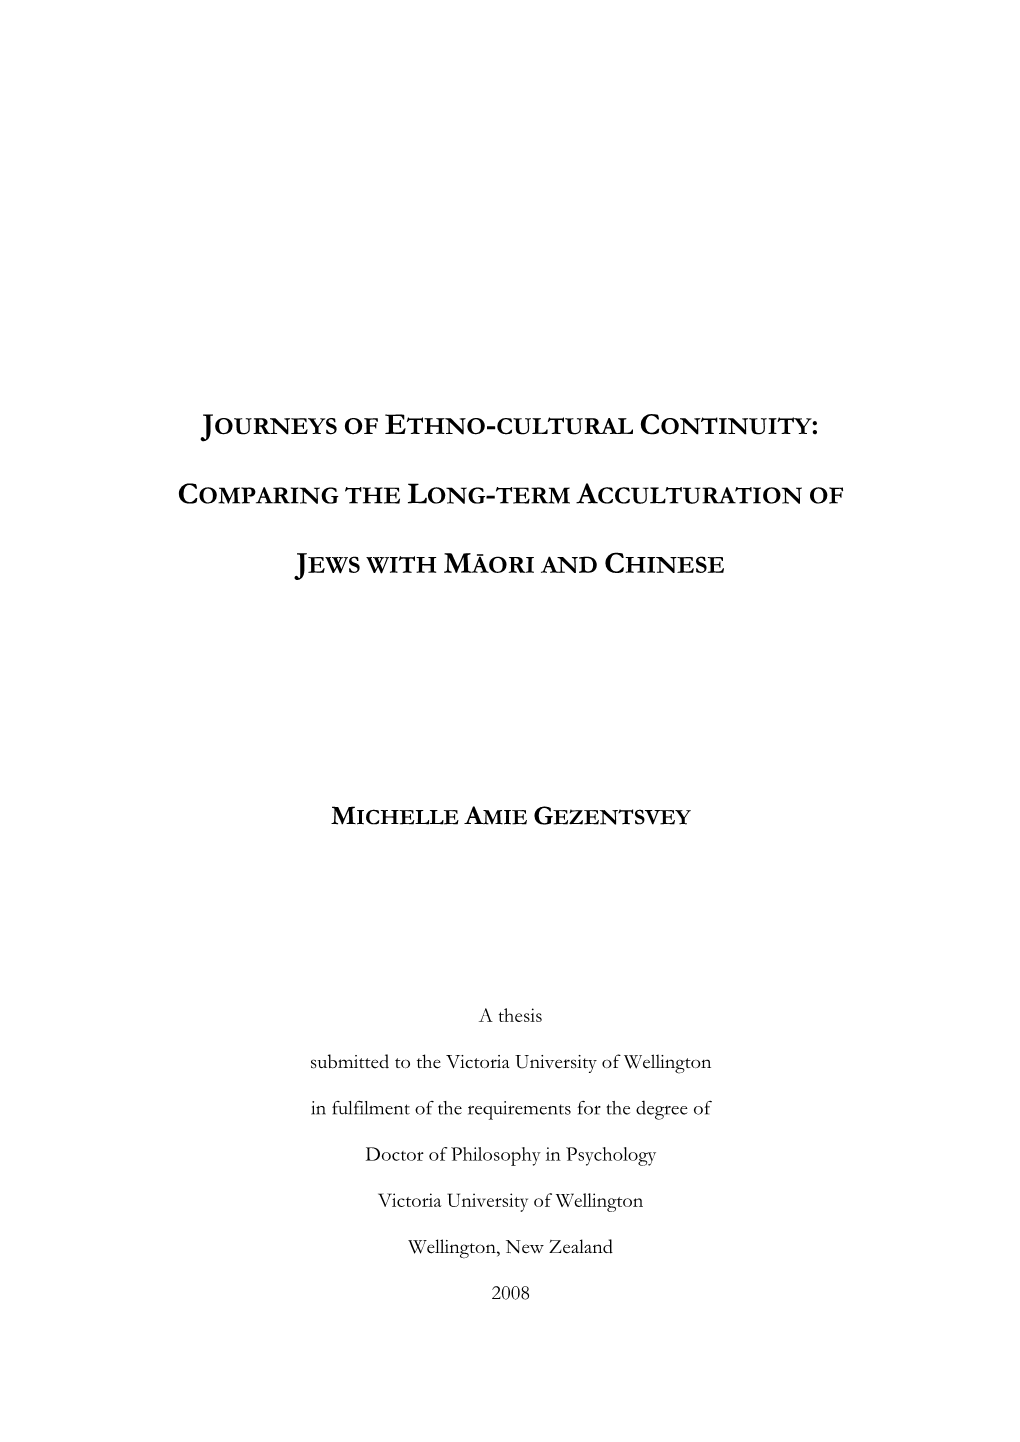 Journeys of Ethno-Cultural Continuity